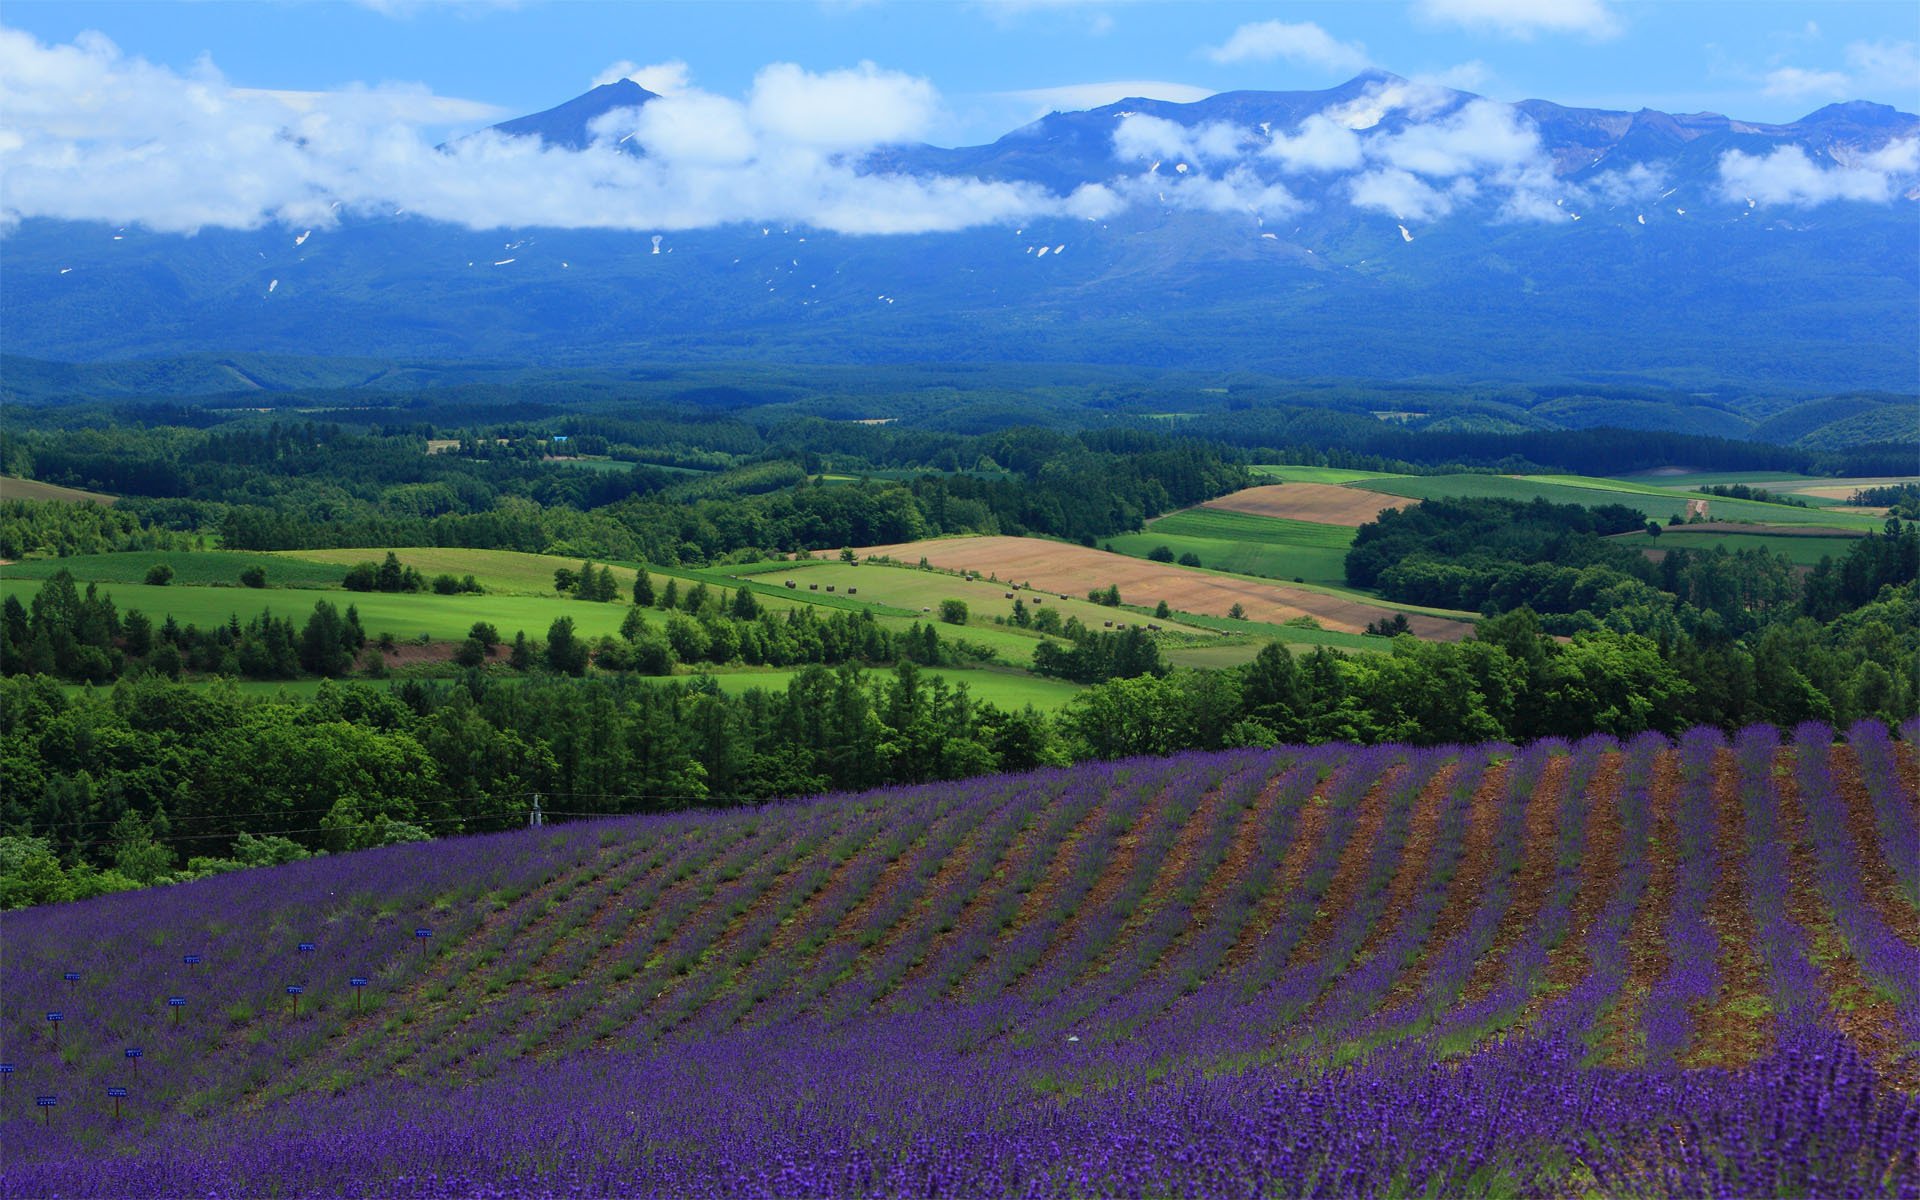 Lavender field on the background of forest and mountains